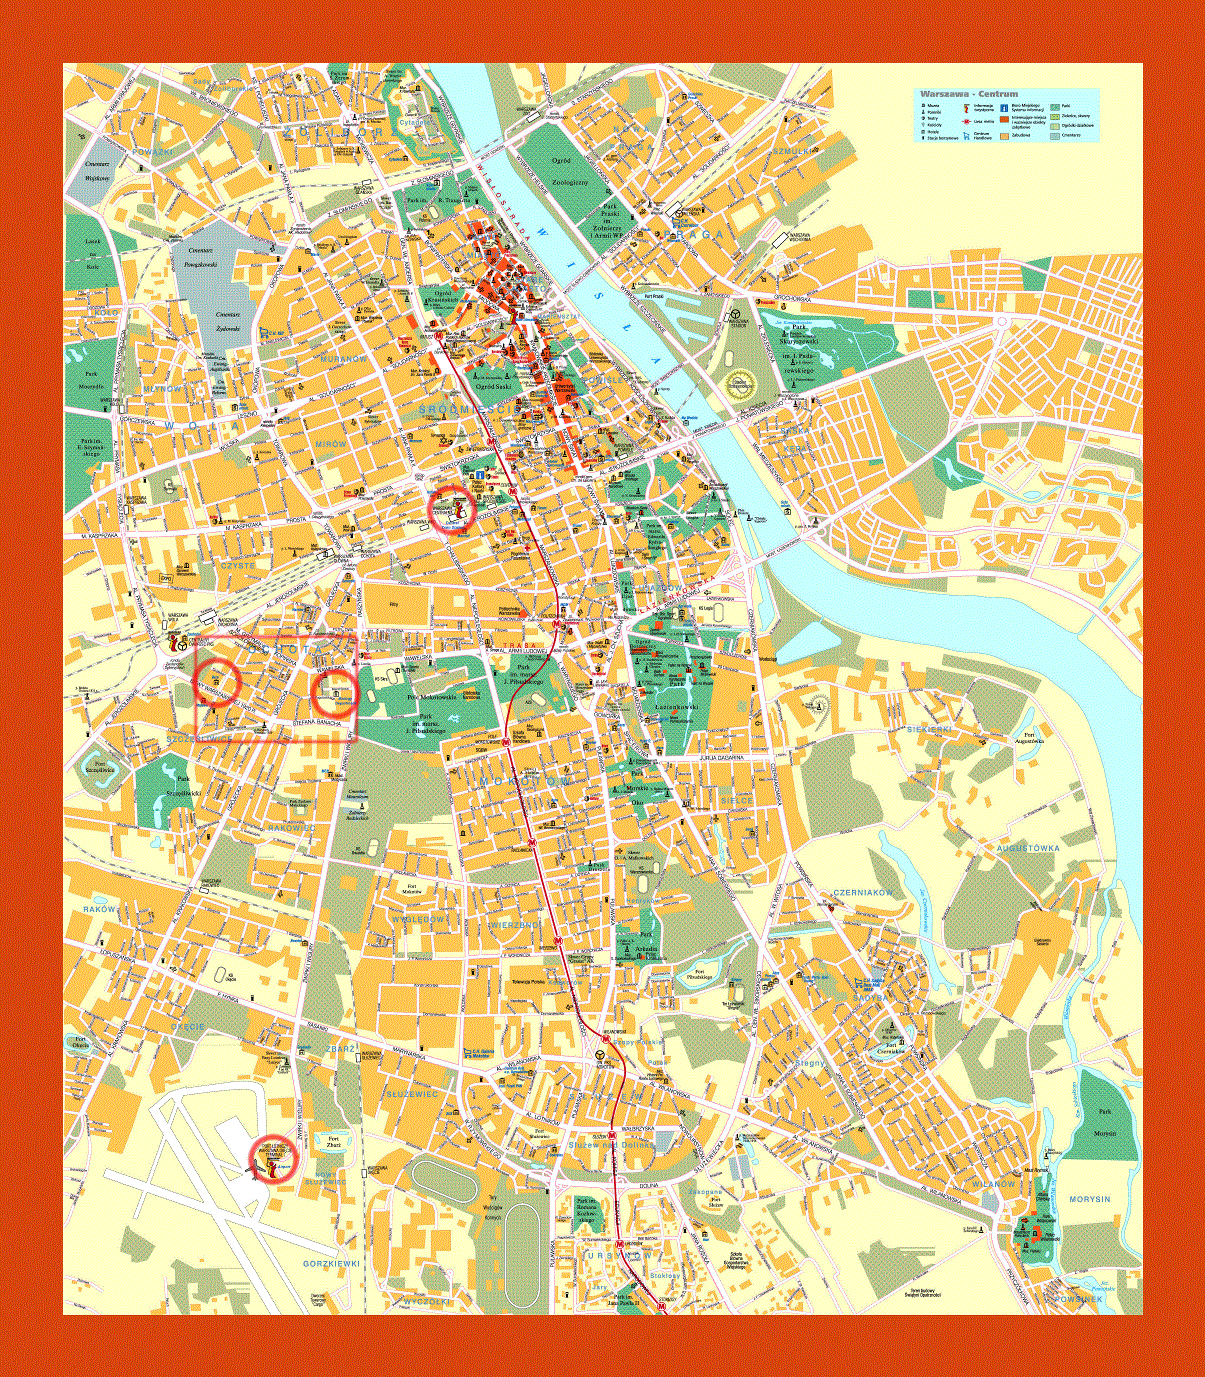 Road and tourist map of Warsaw city center